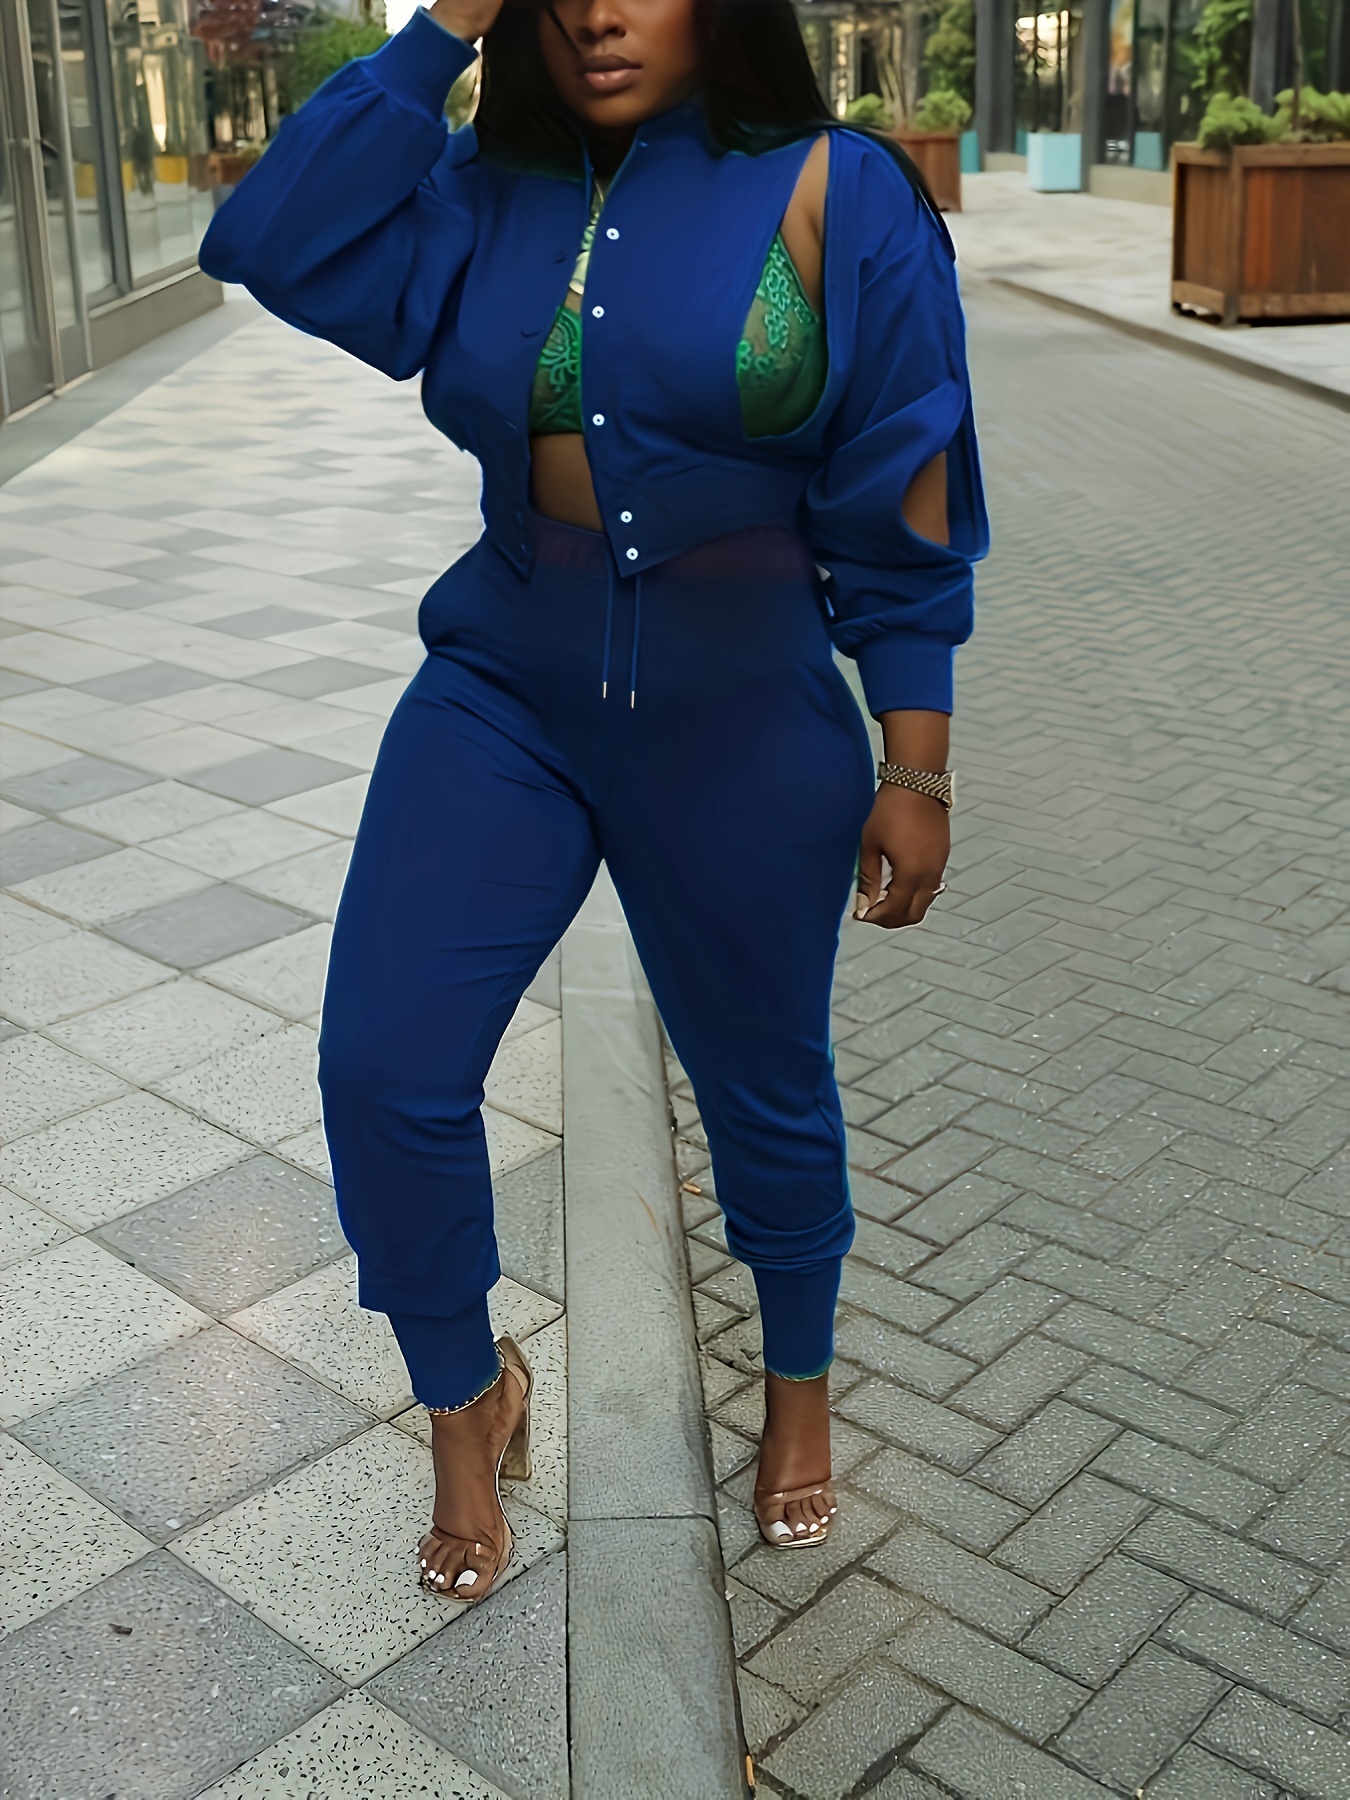 Crystal Beaded Two Piece Set: Long Sleeve Crew Neck Plus Size Jackets And  Skinny Pants For Women Plus Size African Fashion Suit JN2 From  Whenever1808, $36.67